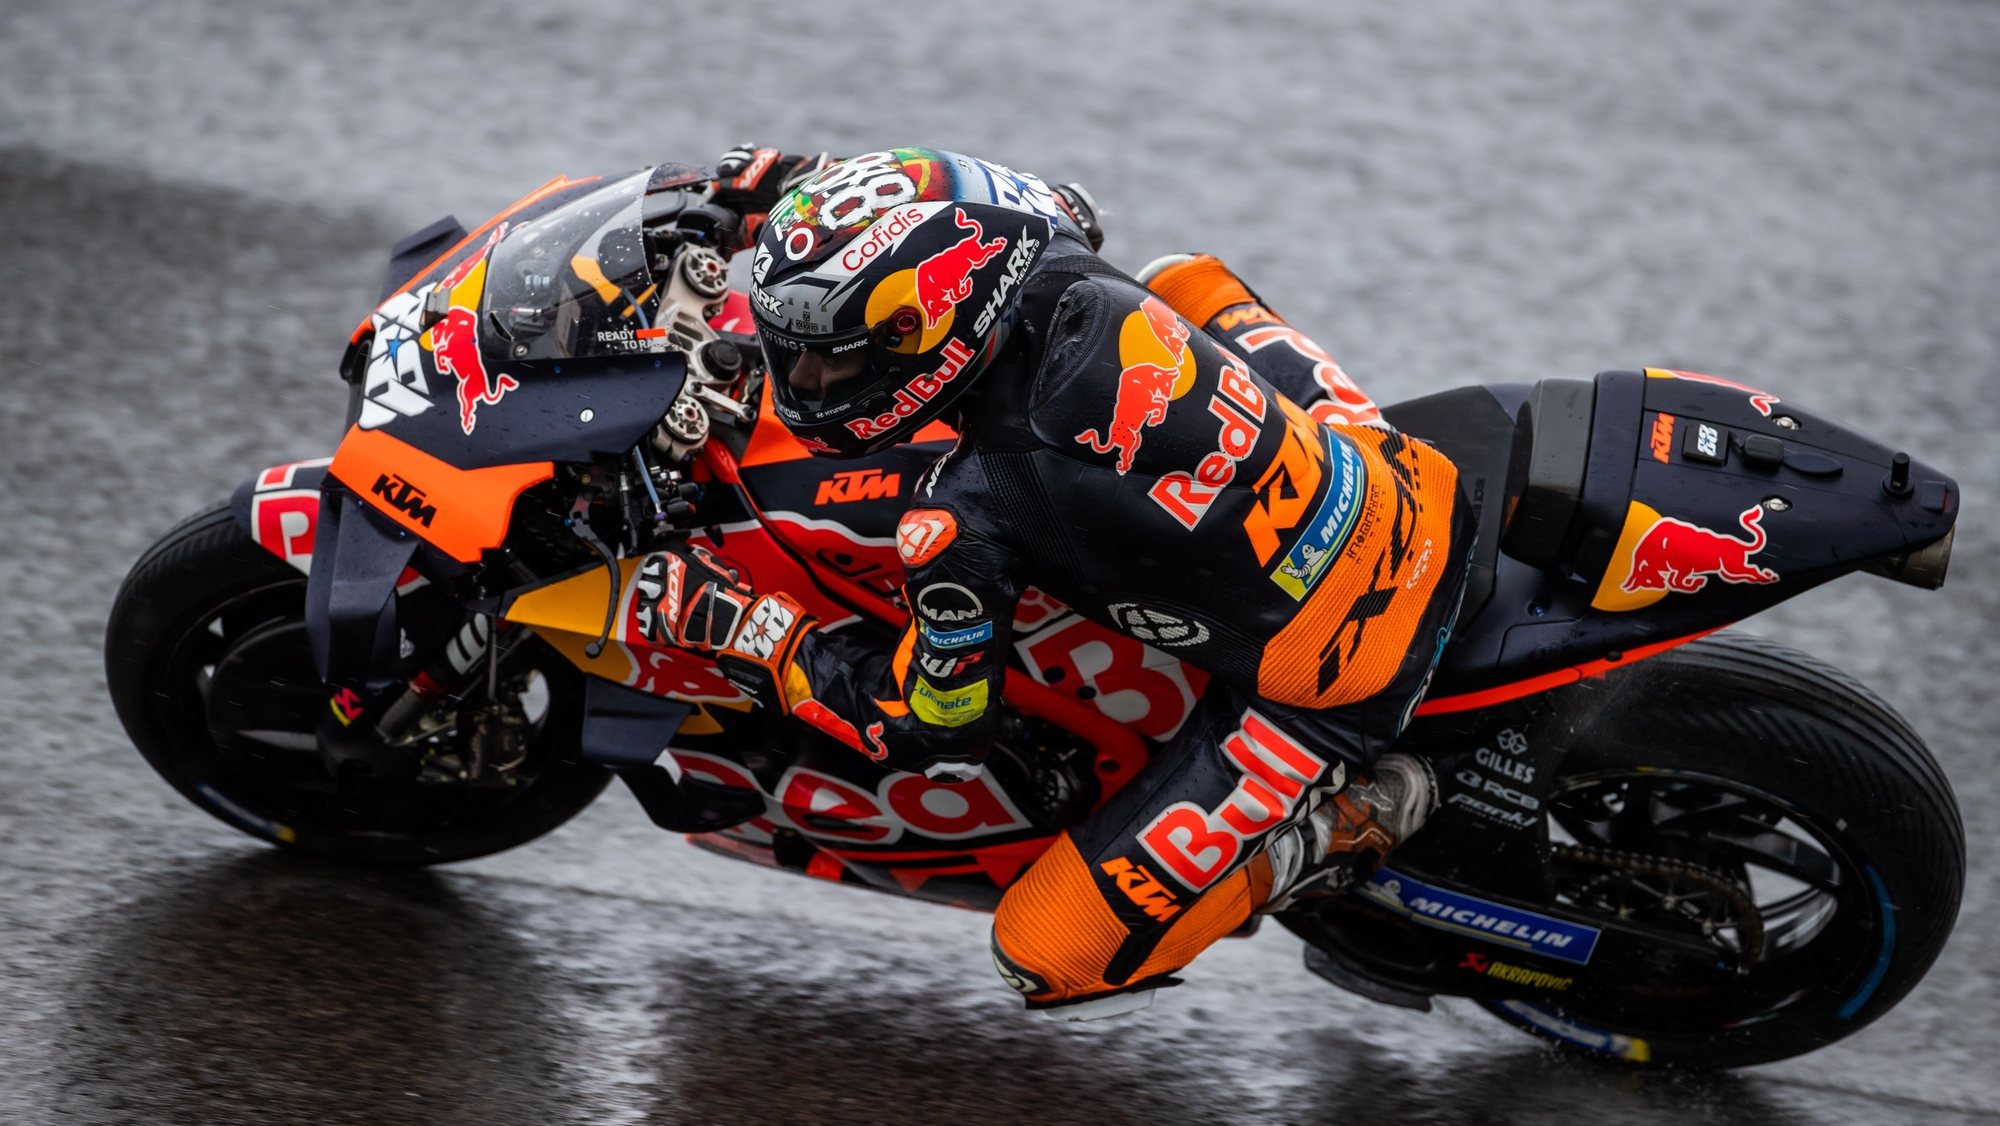 Portuguese rider Miguel Oliveira of Red Bull KTM Factory Racing team in action during the second practice session for the Grand Prix of Portugal at the Algarve International race track, Portimao, south of Portugal, 22 April 2022. JOSE SENA GOULAO/LUSA